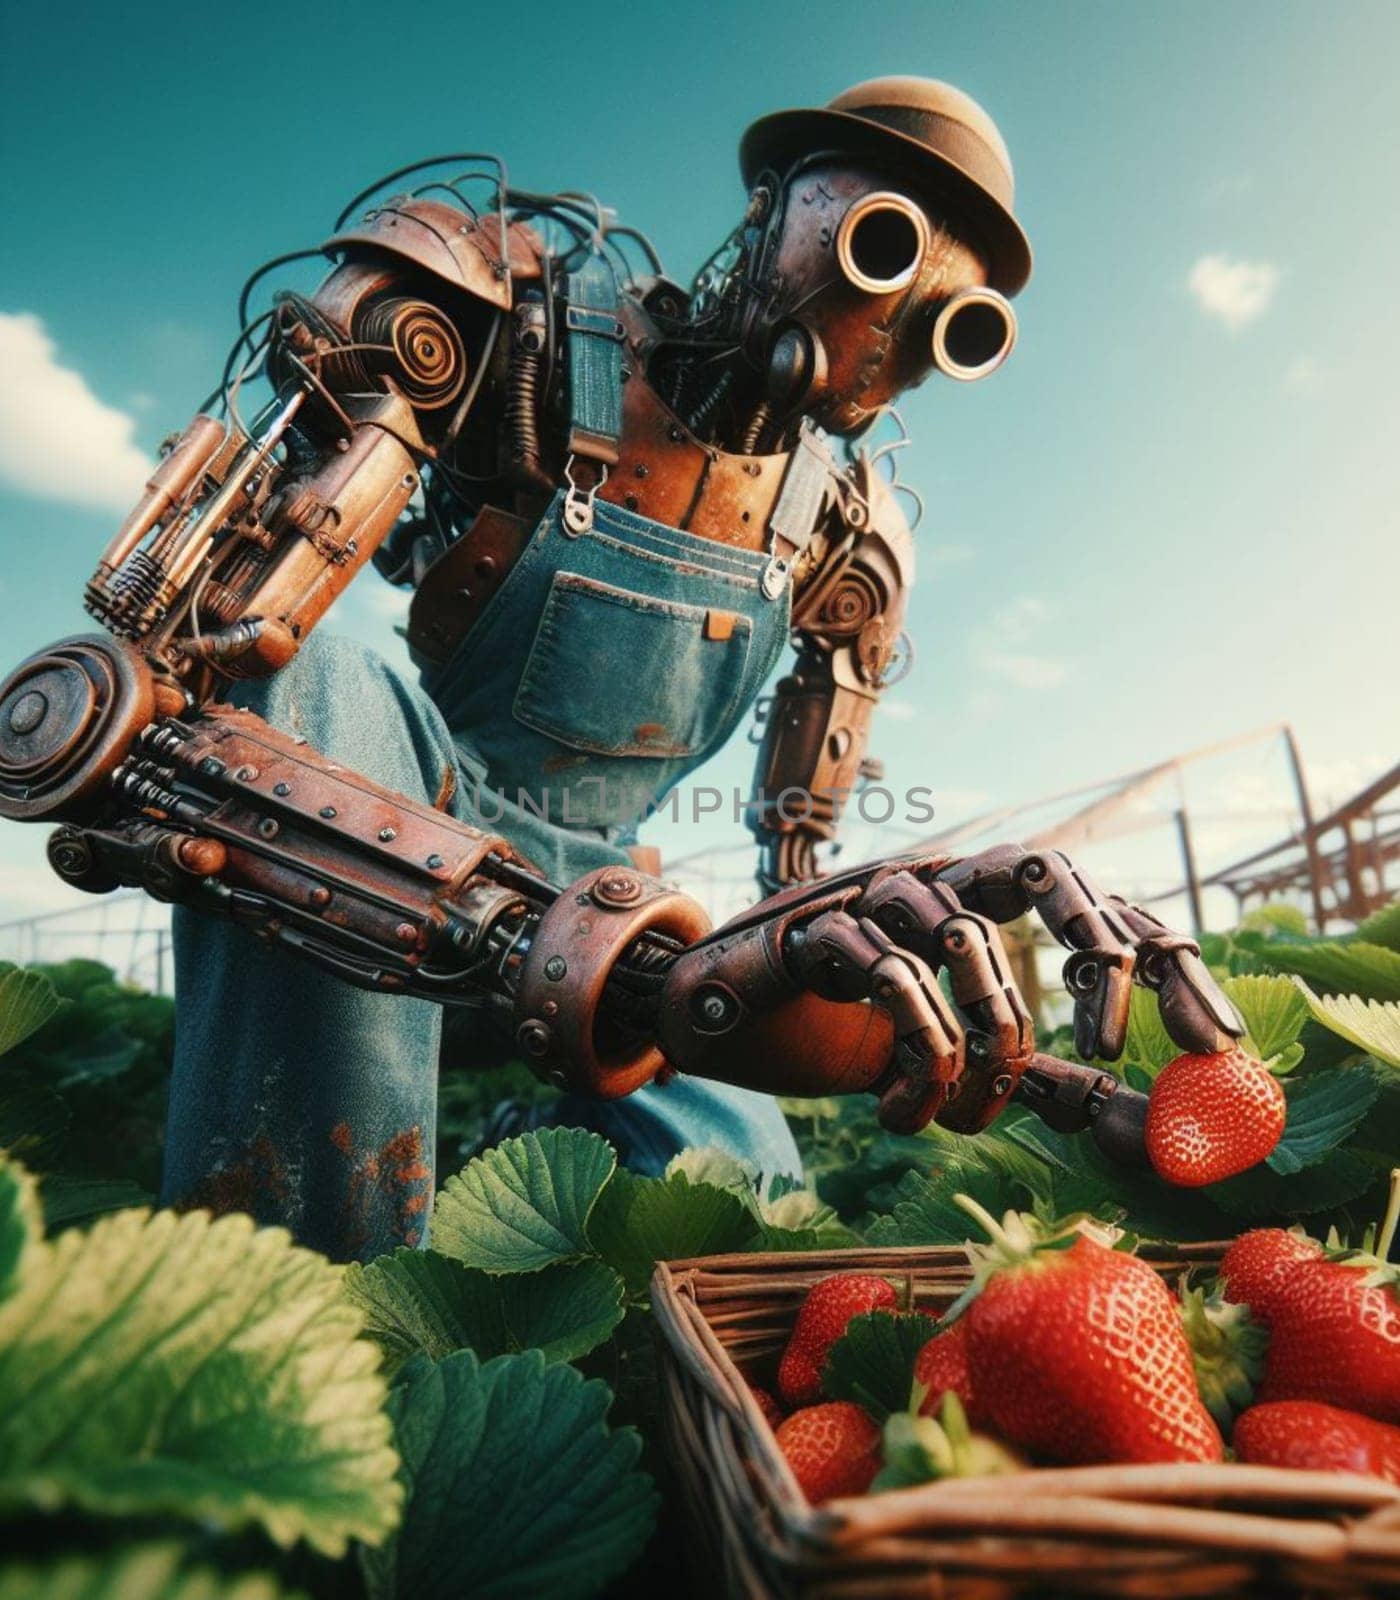 robot working in farm vegetable garden to grow produce for human consumption by verbano